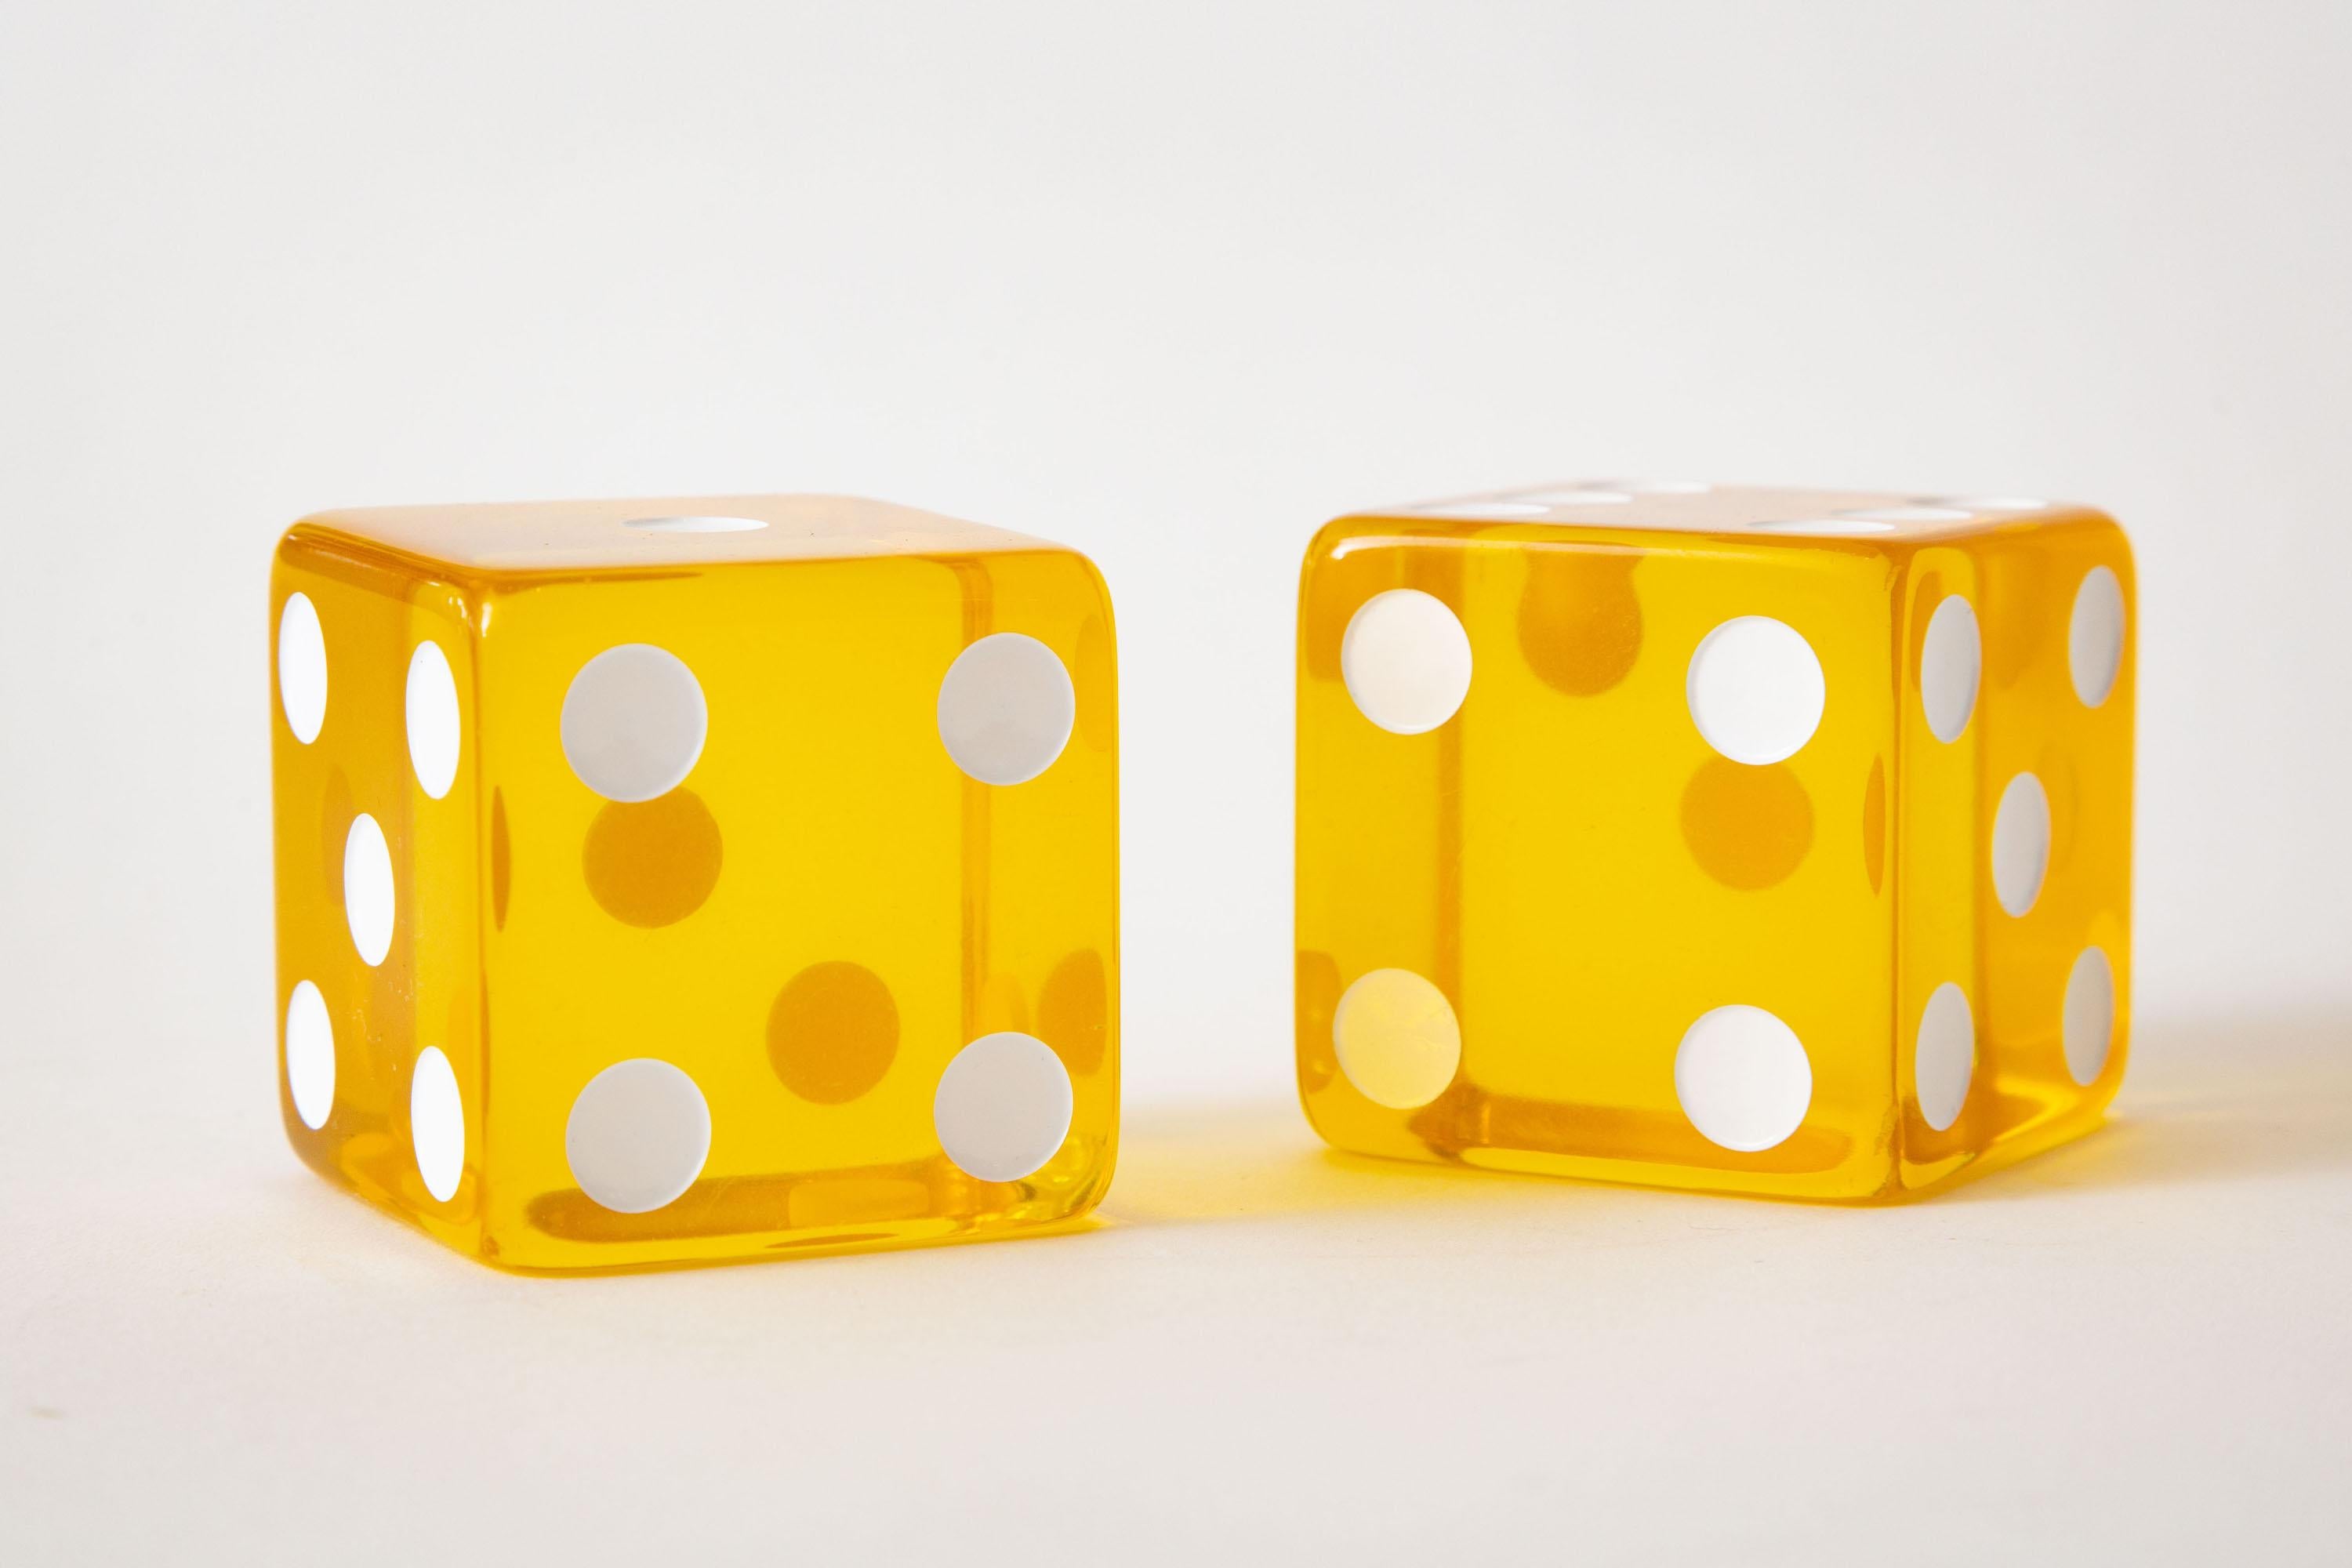 These fun and happy yellow to amber yellow and white vintage square lucite dice are from the 60's. They make a great desk accessory and or object sculpture for a cocktail table or console. Sunshine will be brought into your home. Sold as a pair.